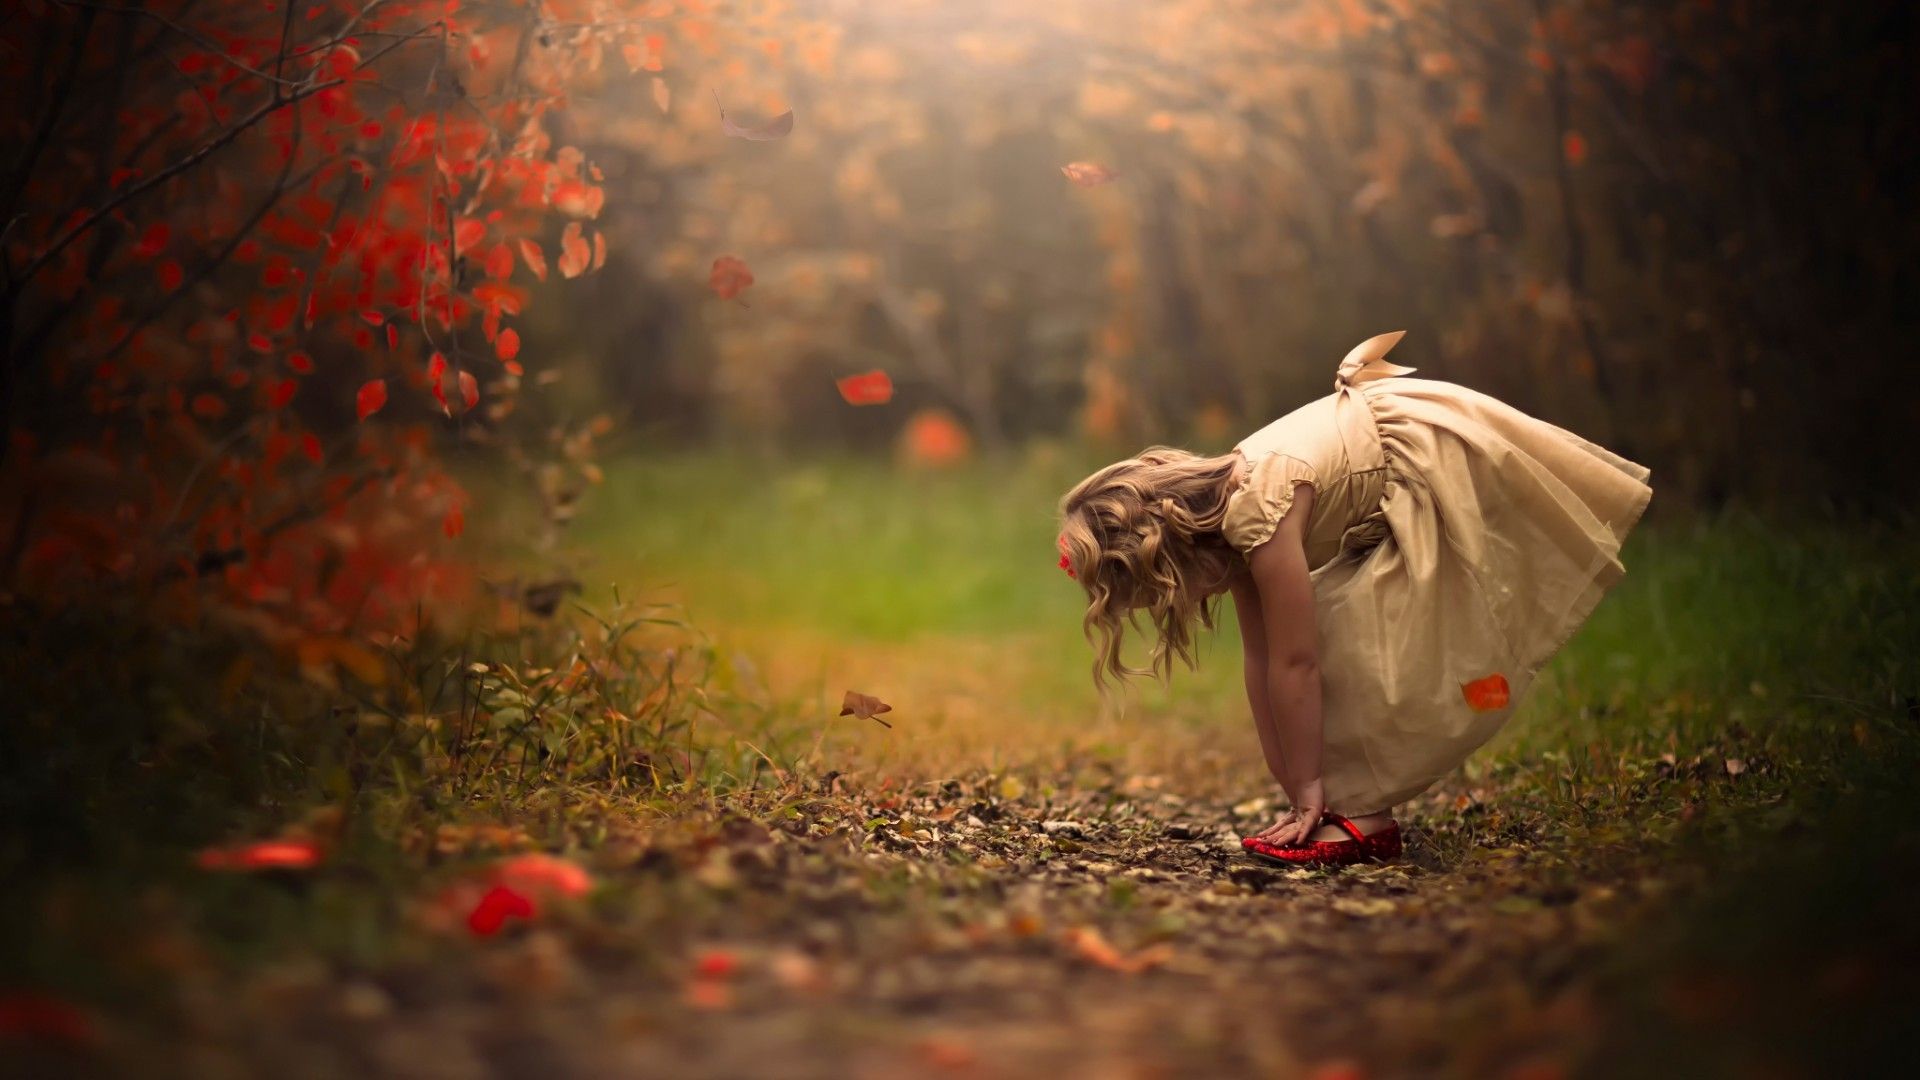 fall, depth of field, red shoes, children, girl, forest wallpaper